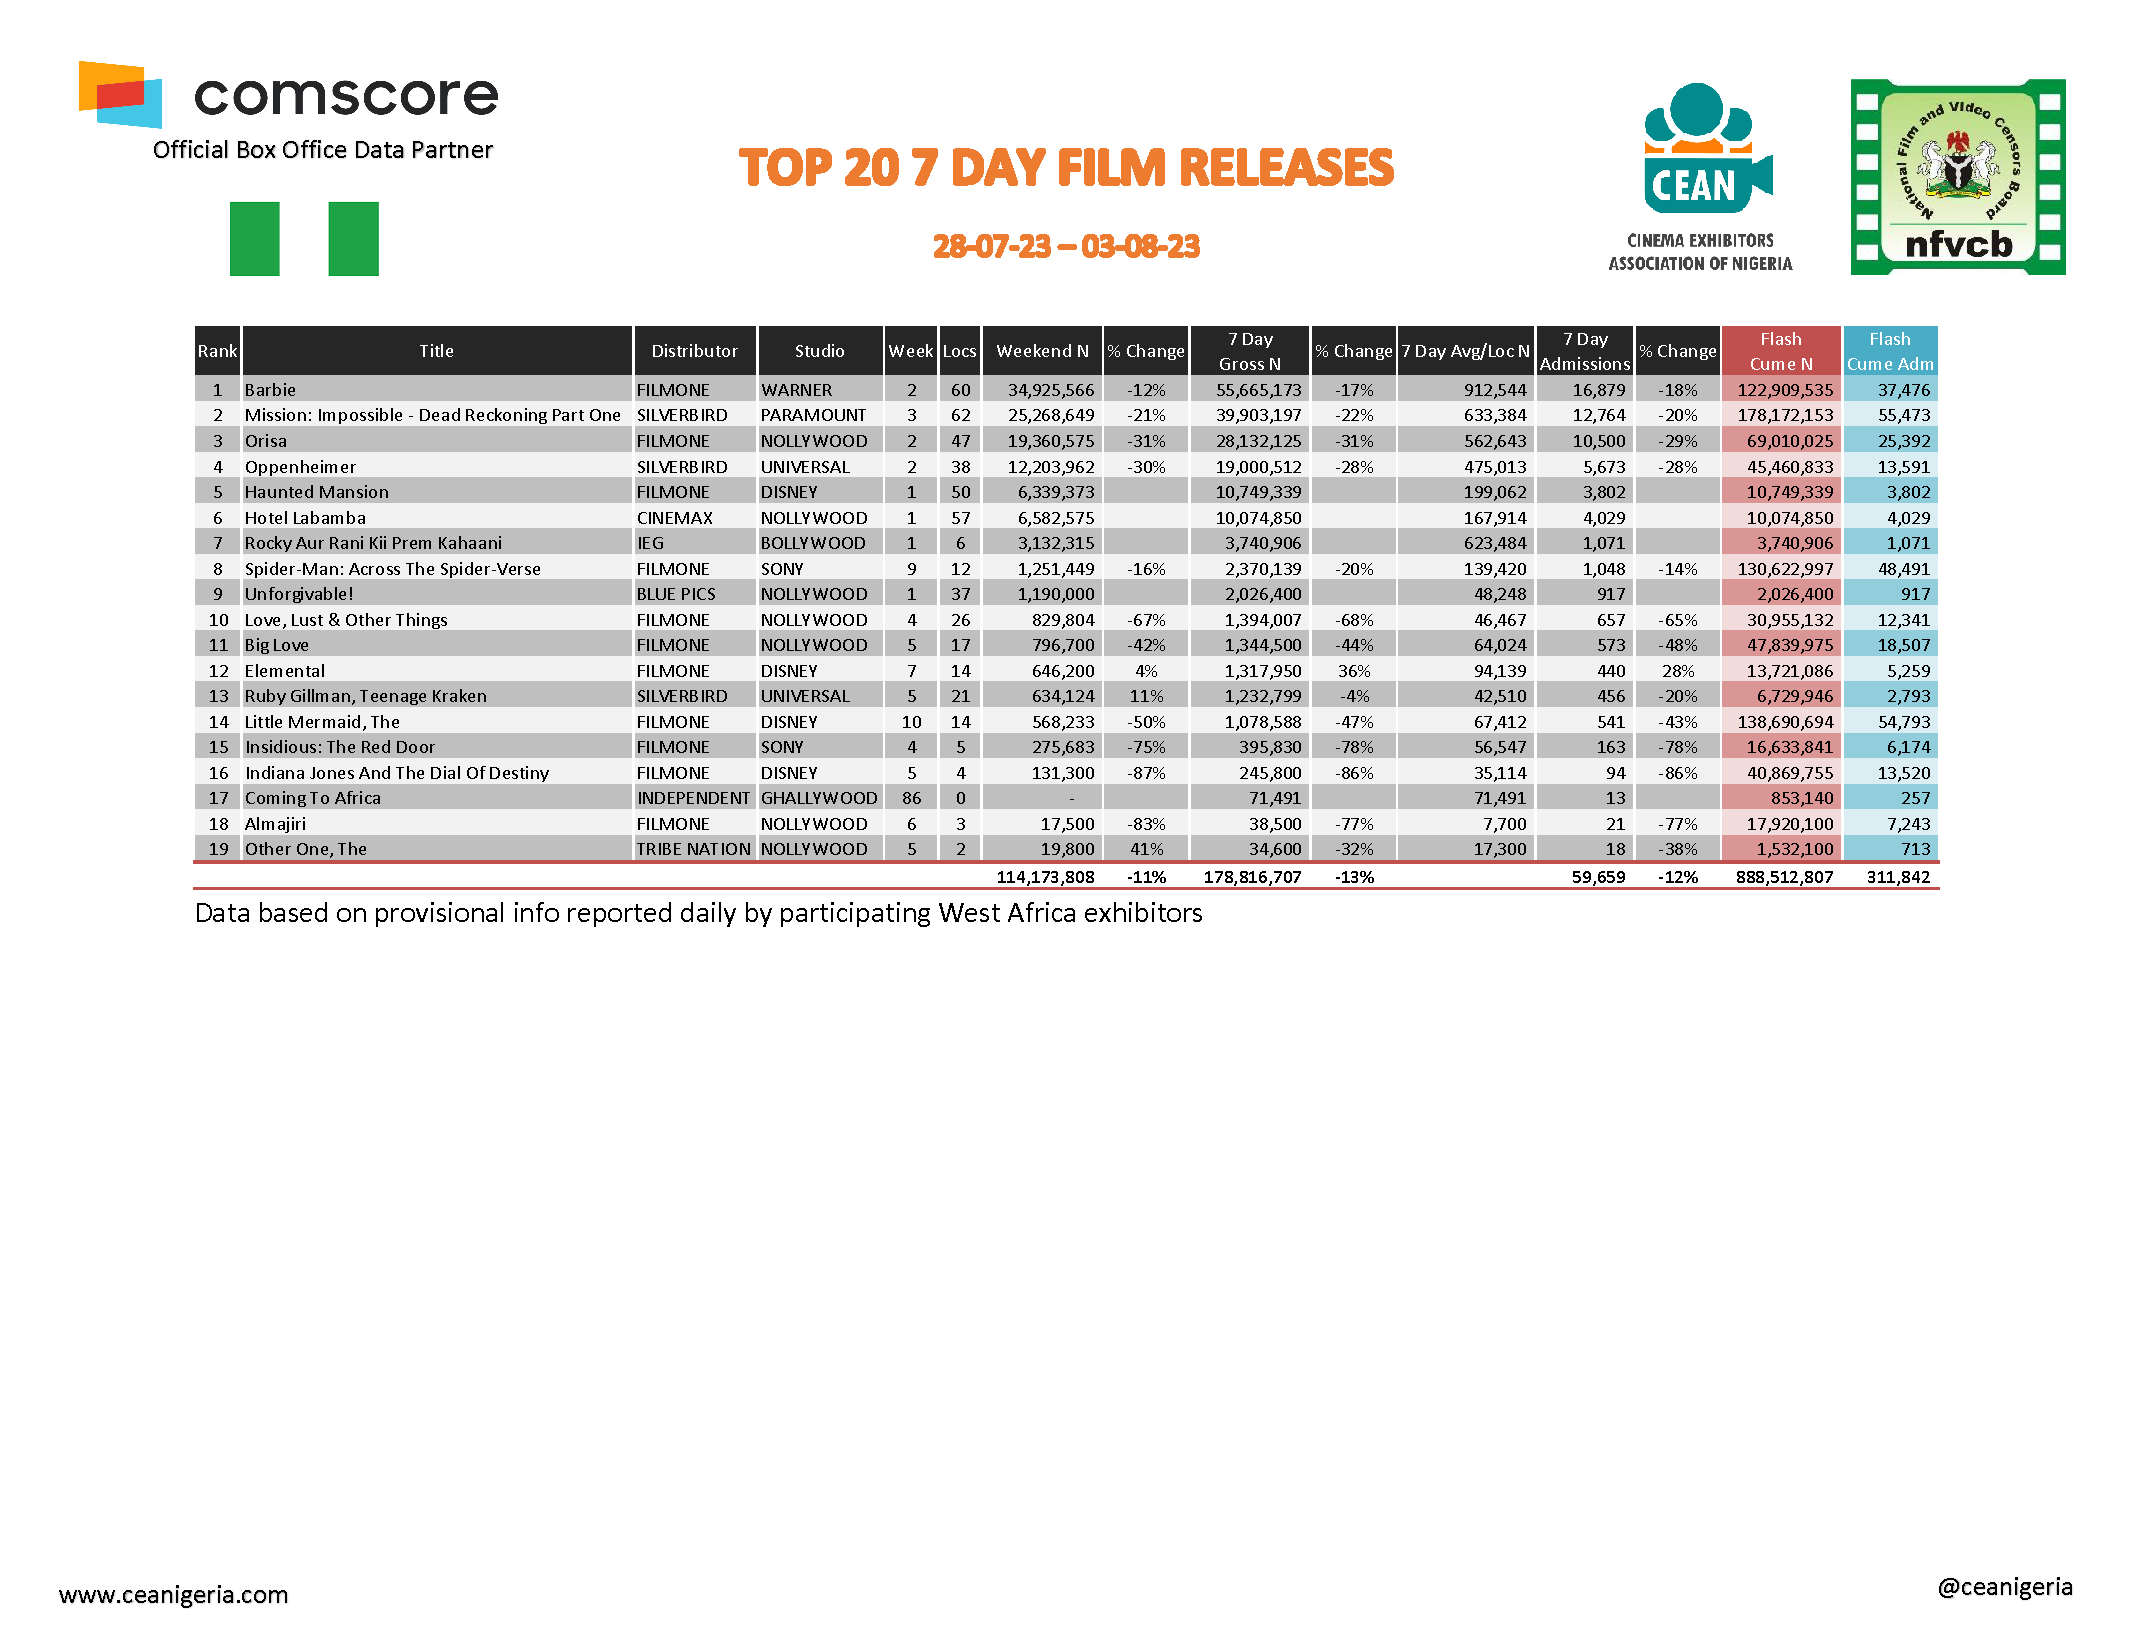 Top 20 films 7 Day 28th July 3rd August